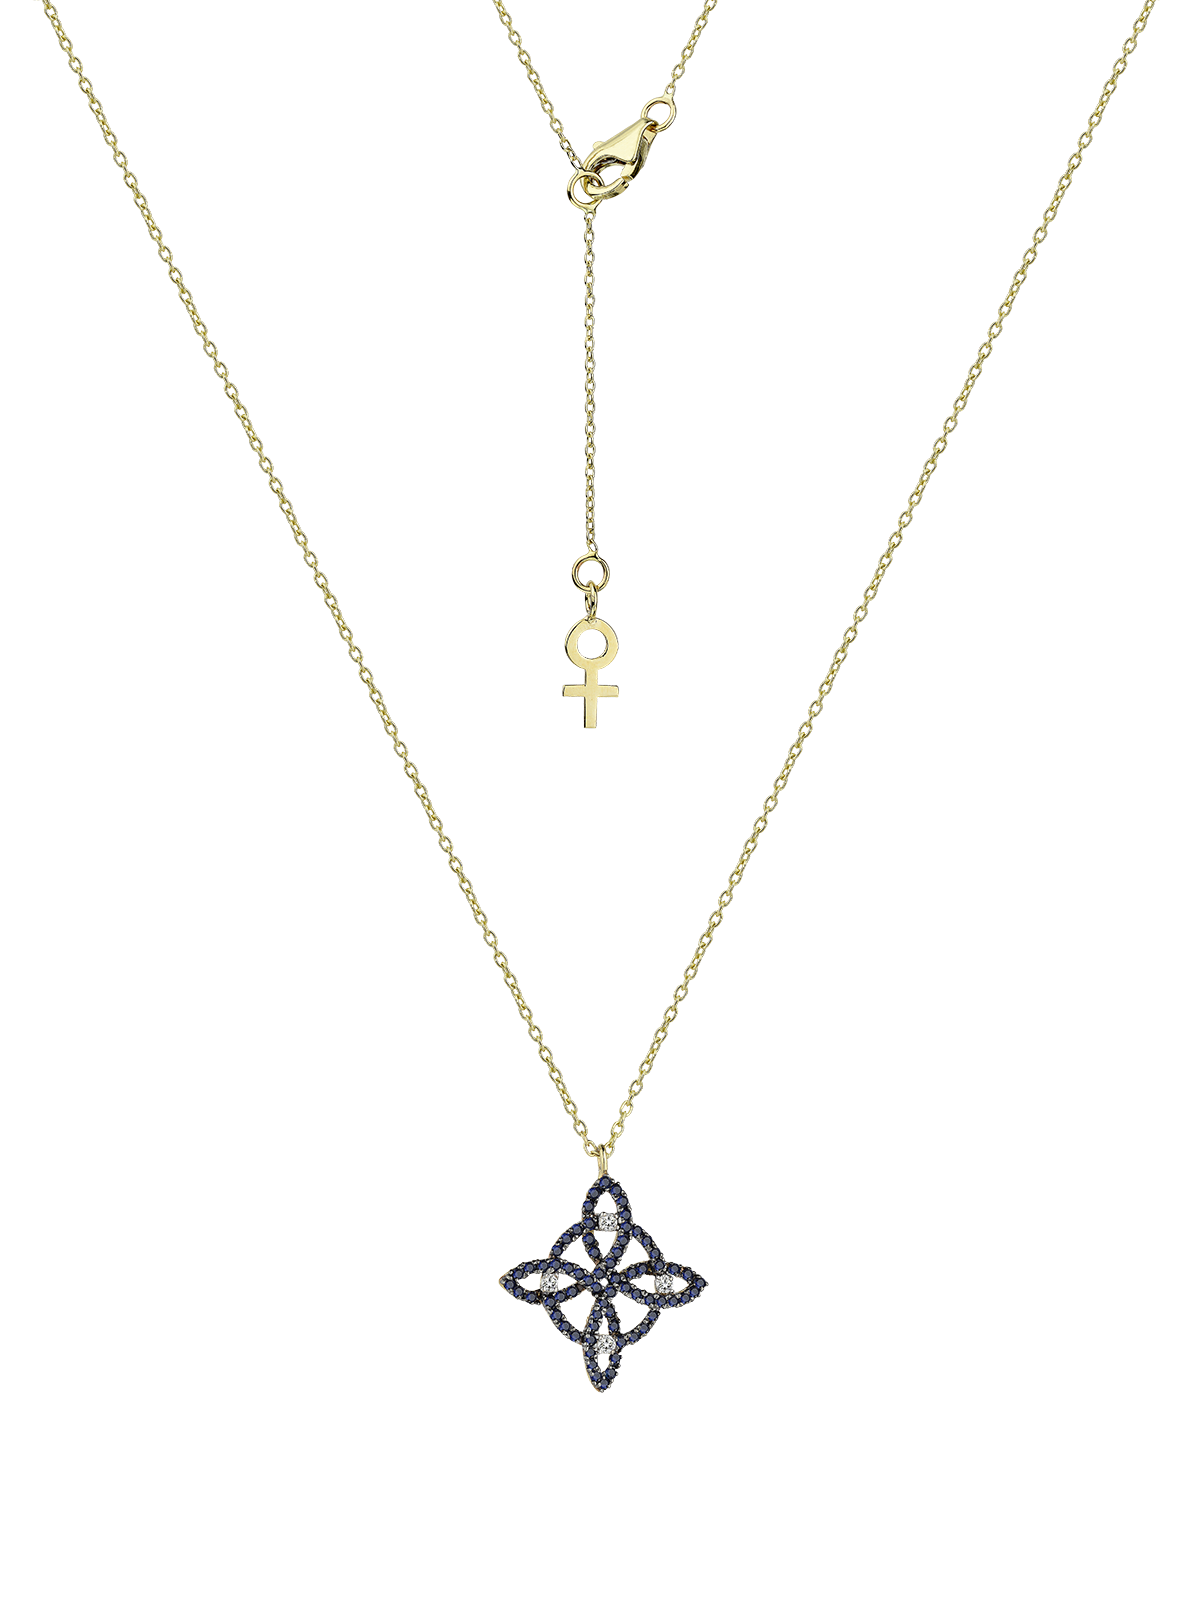 Full Magic Knot Necklace in Yellow Gold - Her Story Shop